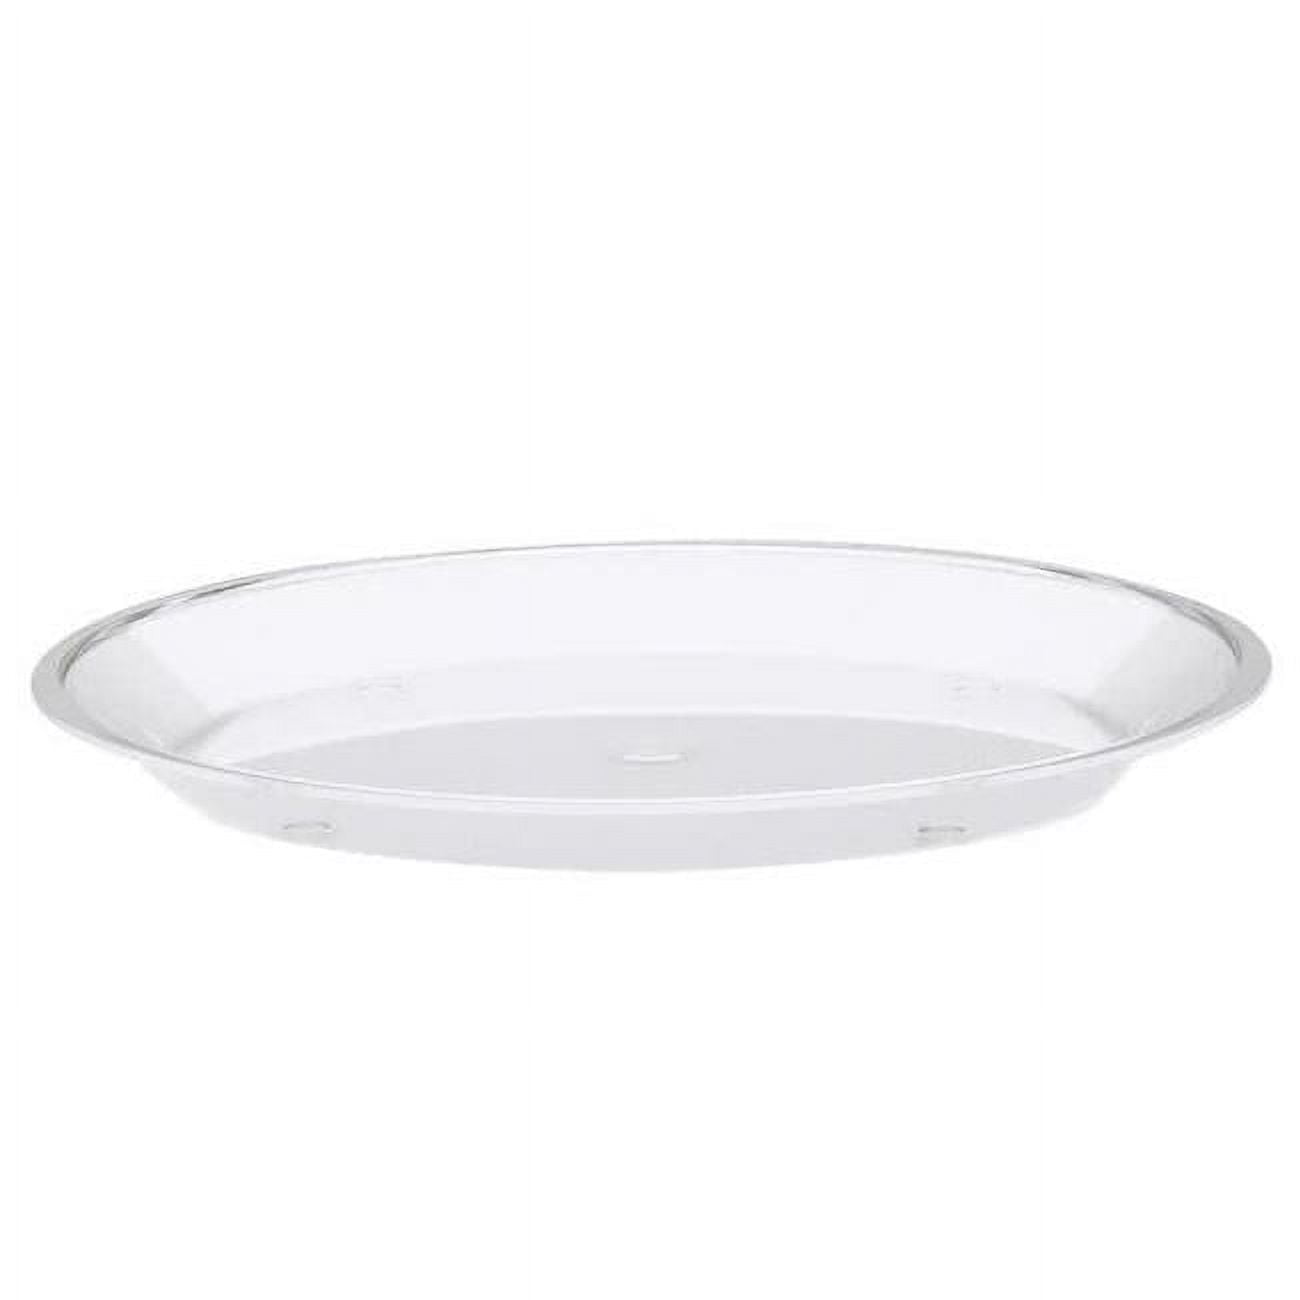 Picture of Cal Mil 315-12-12 12 in. Round Shallow Tray - Clear